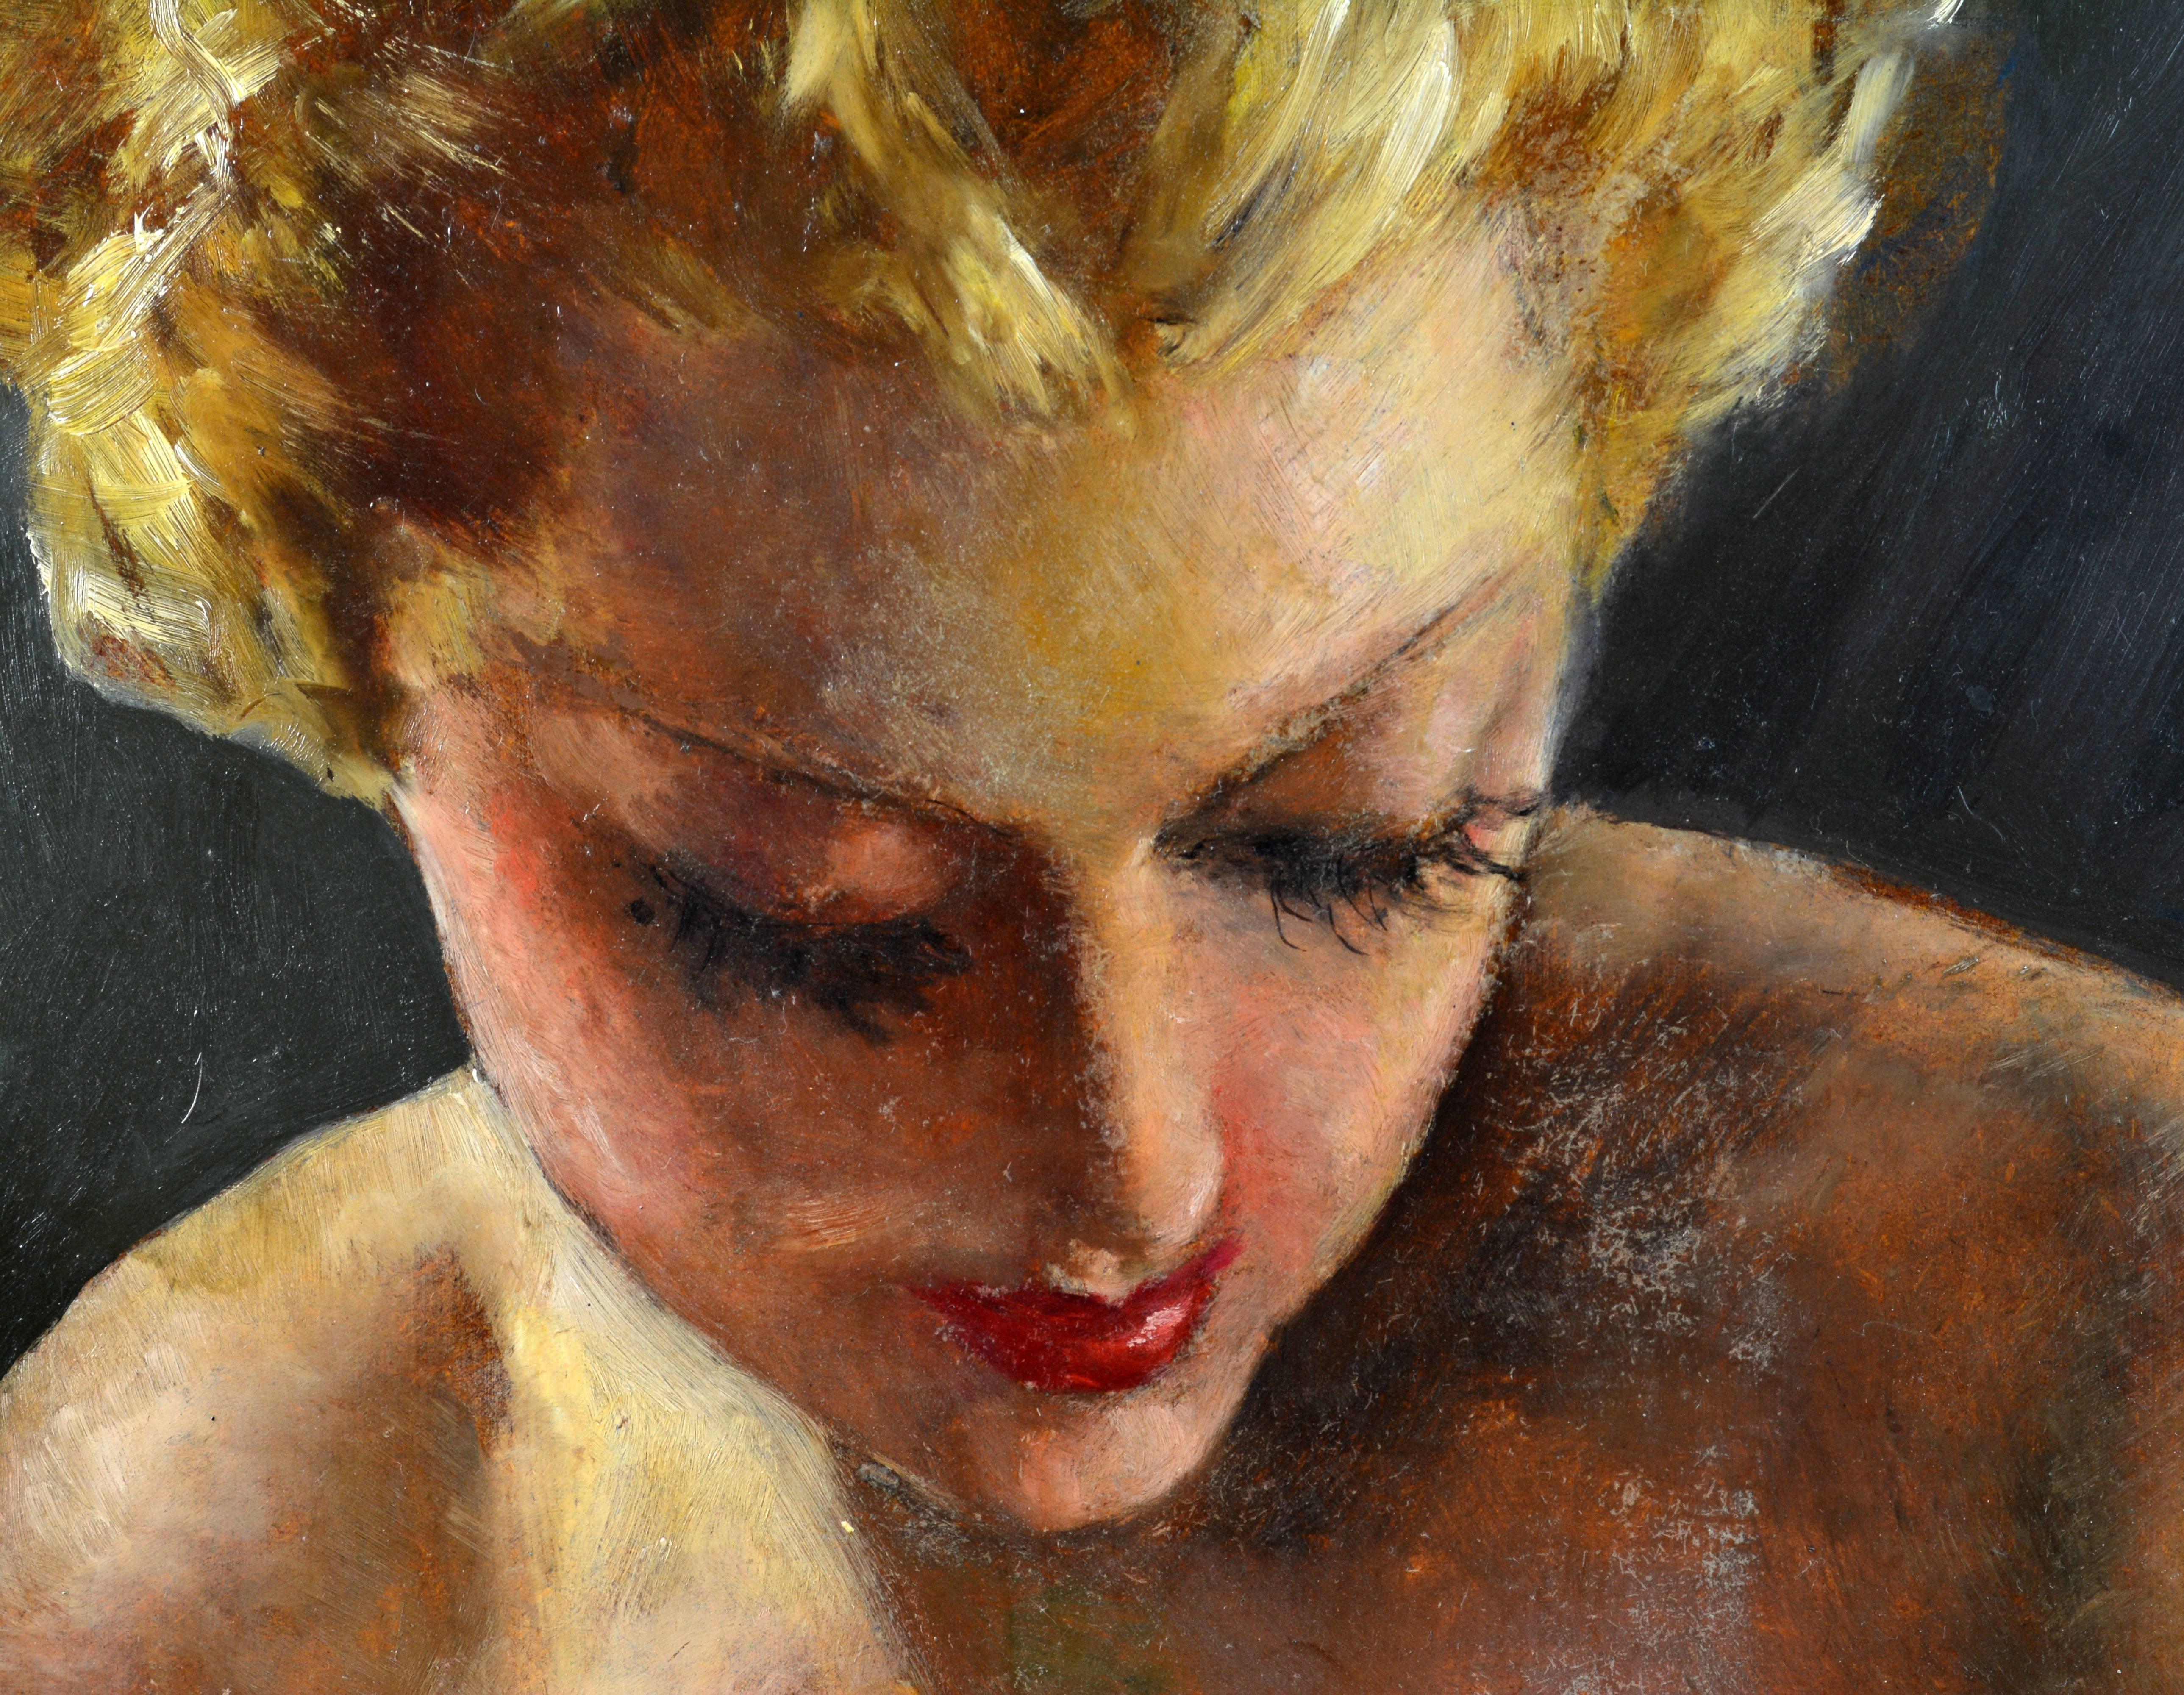 Mid-Century Modern Erotic Nude by Pal Fried, Hungarian 1893-1976, Oil on Panel, Stunning